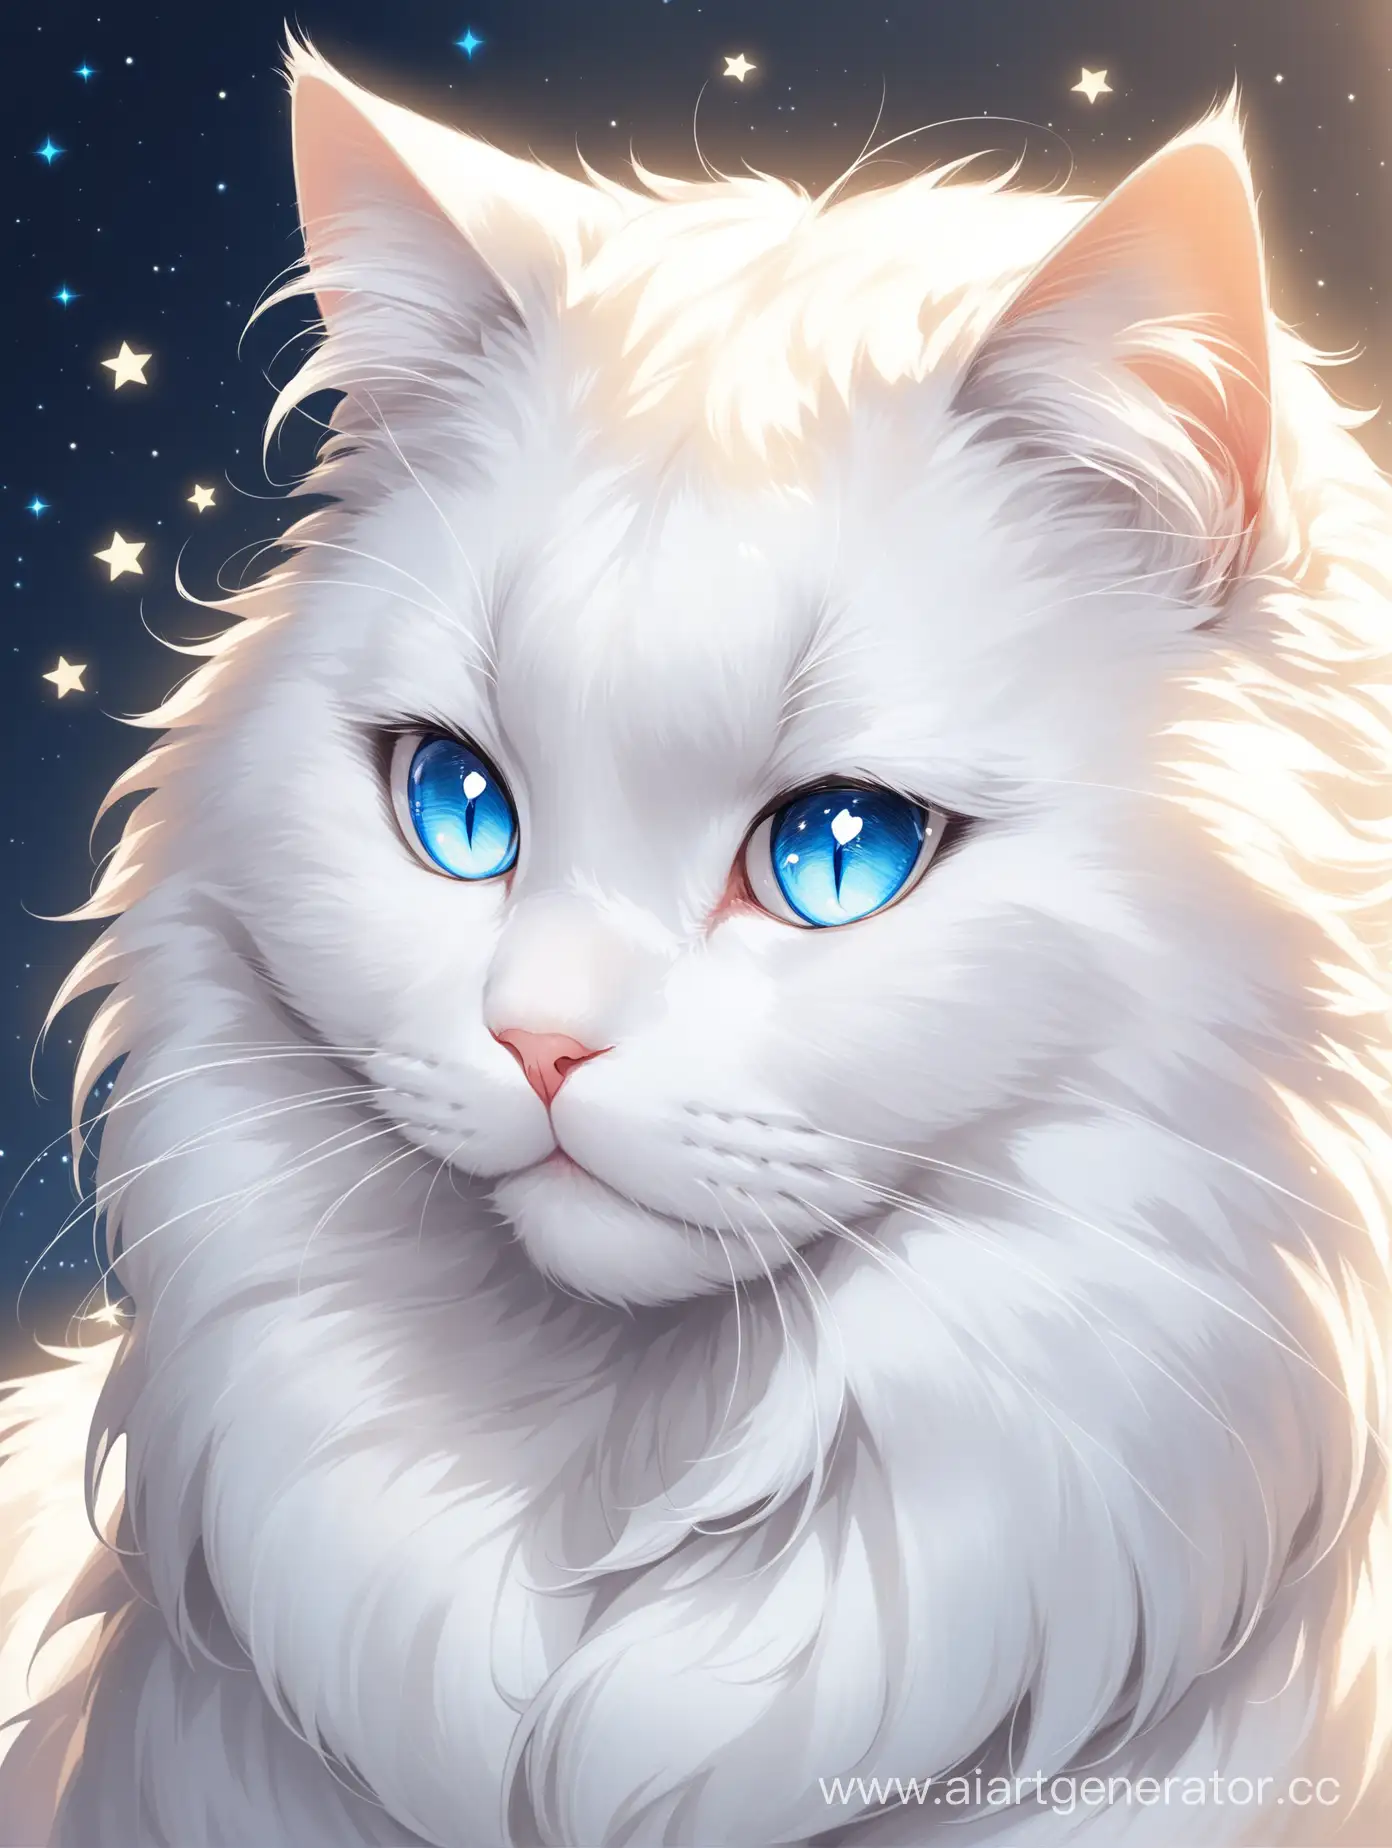 Large white cat with blue eyes, It has white, star-like fur. A very beautiful, fluffy cat, moderately well-fed and well-groomed.